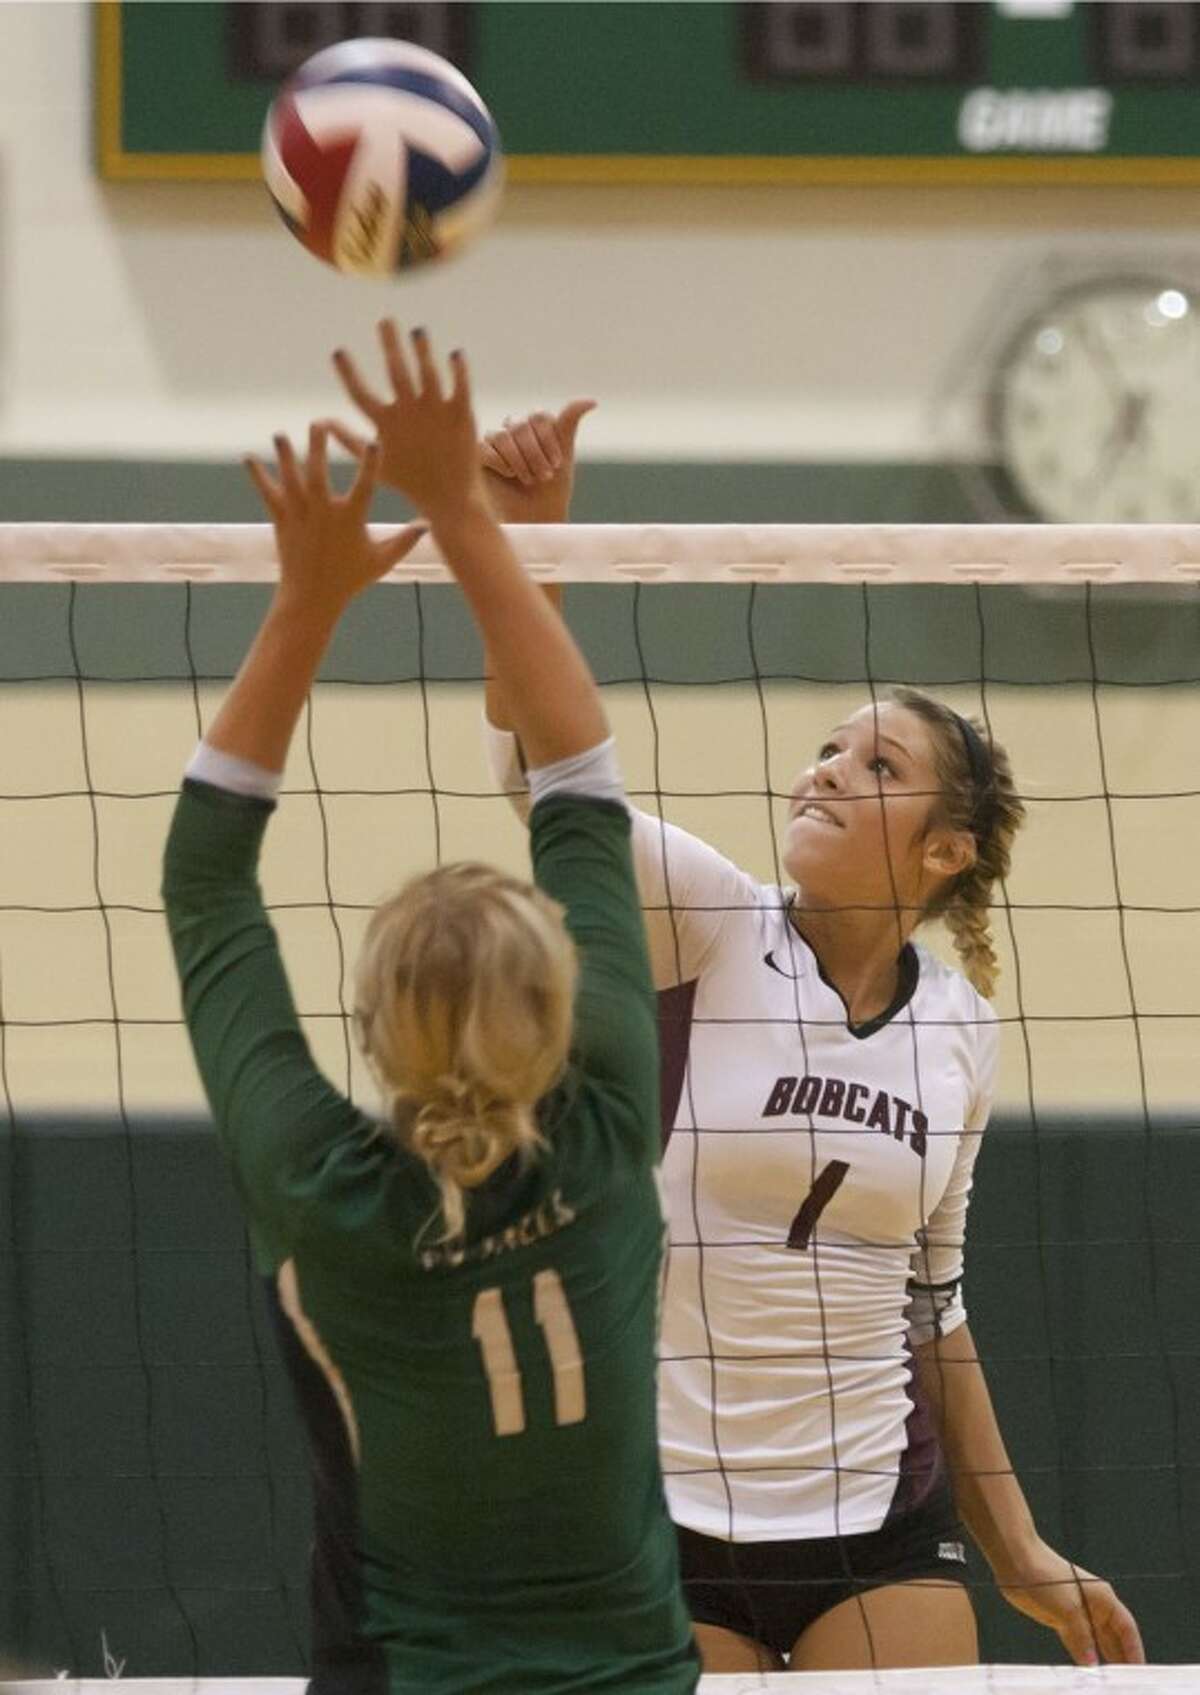 Cy-Fair's Lila Palmer spikes the ball over the net during the Lady Bobcats' match against Cy Falls on Tuesday at Cy Falls High School.